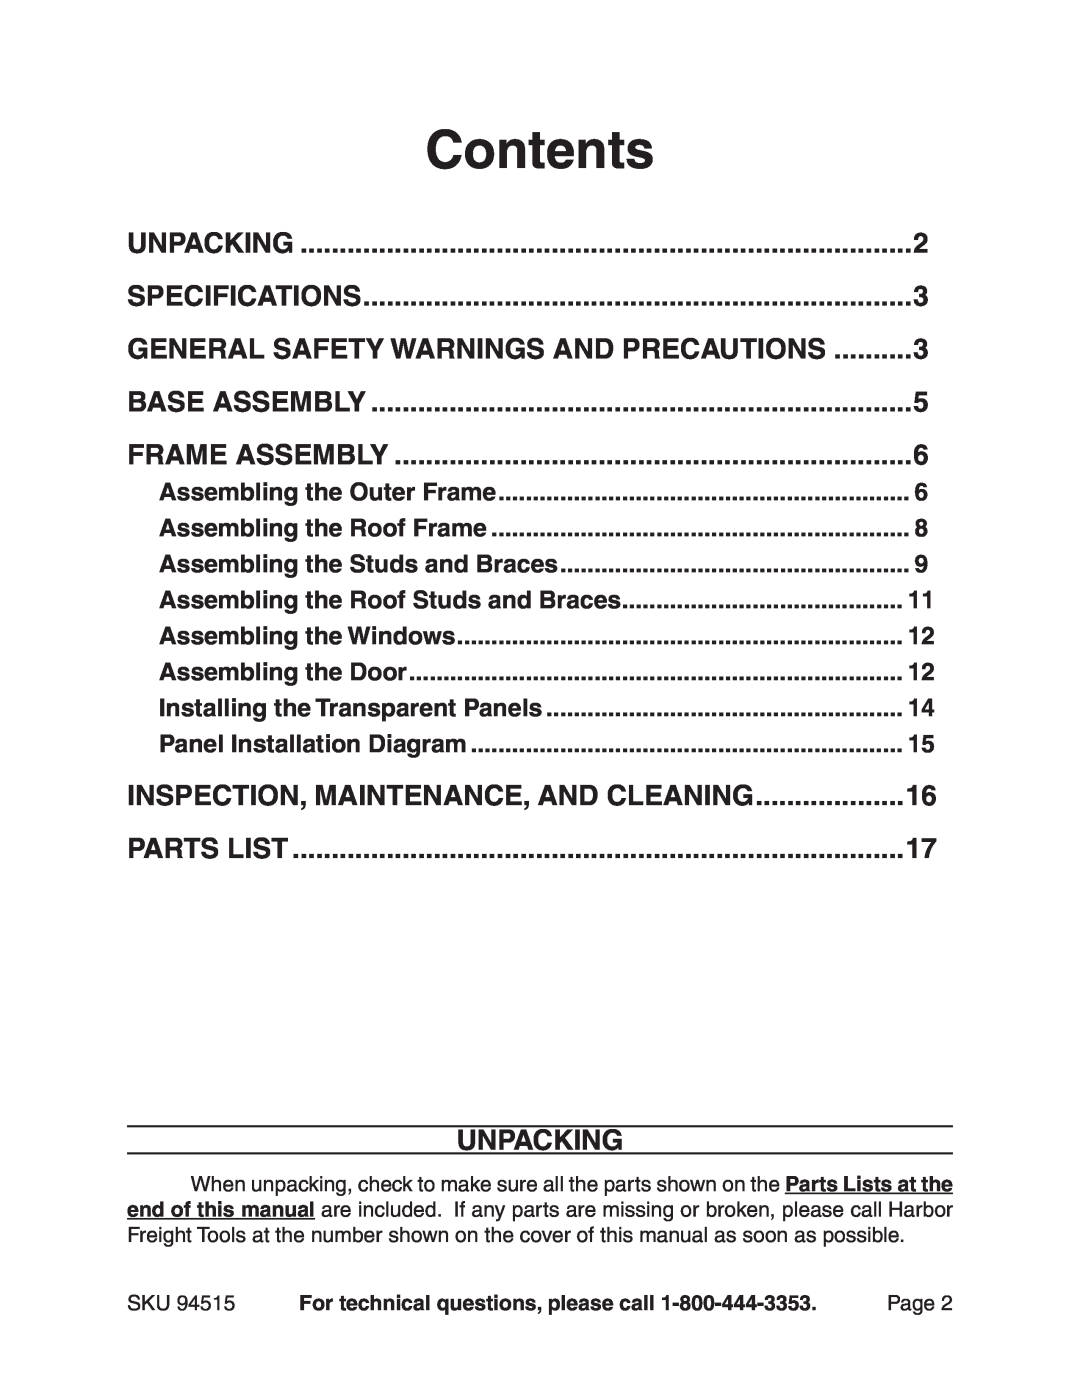 Harbor Freight Tools 94515 manual Contents, General Safety Warnings And Precautions, Base Assembly, Unpacking, Parts List 